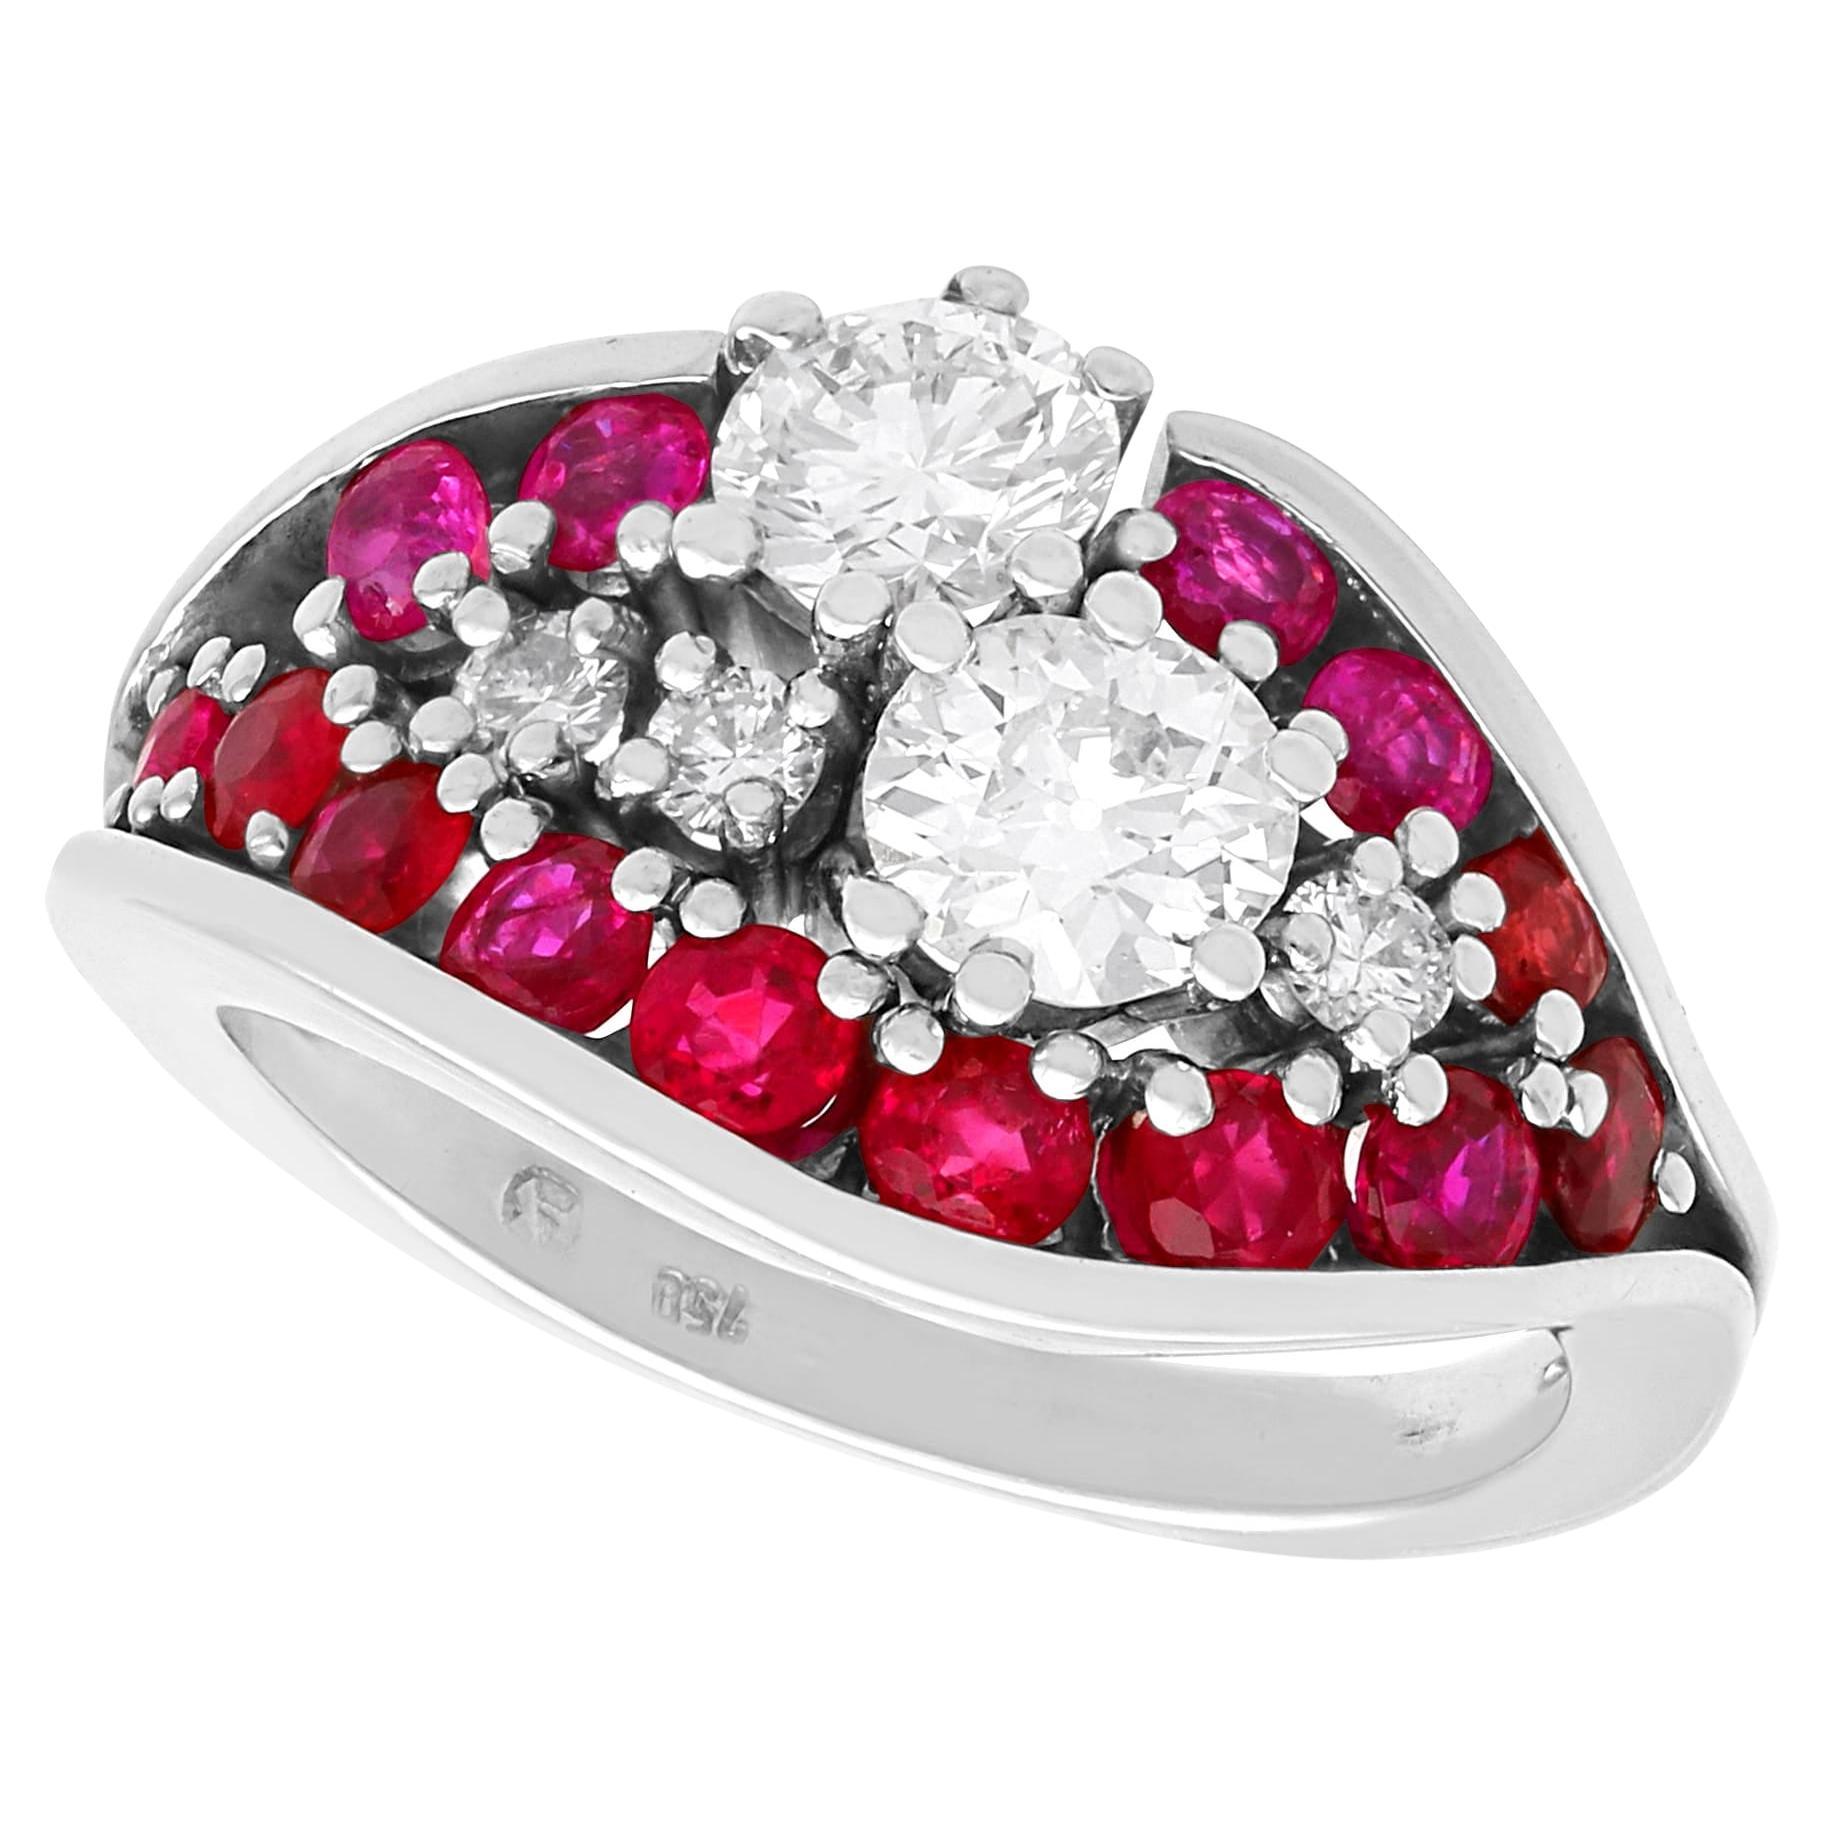 Vintage 0.82 Carat Ruby and 1.28 Carat Diamond 18k White Gold Dress Ring  For Sale